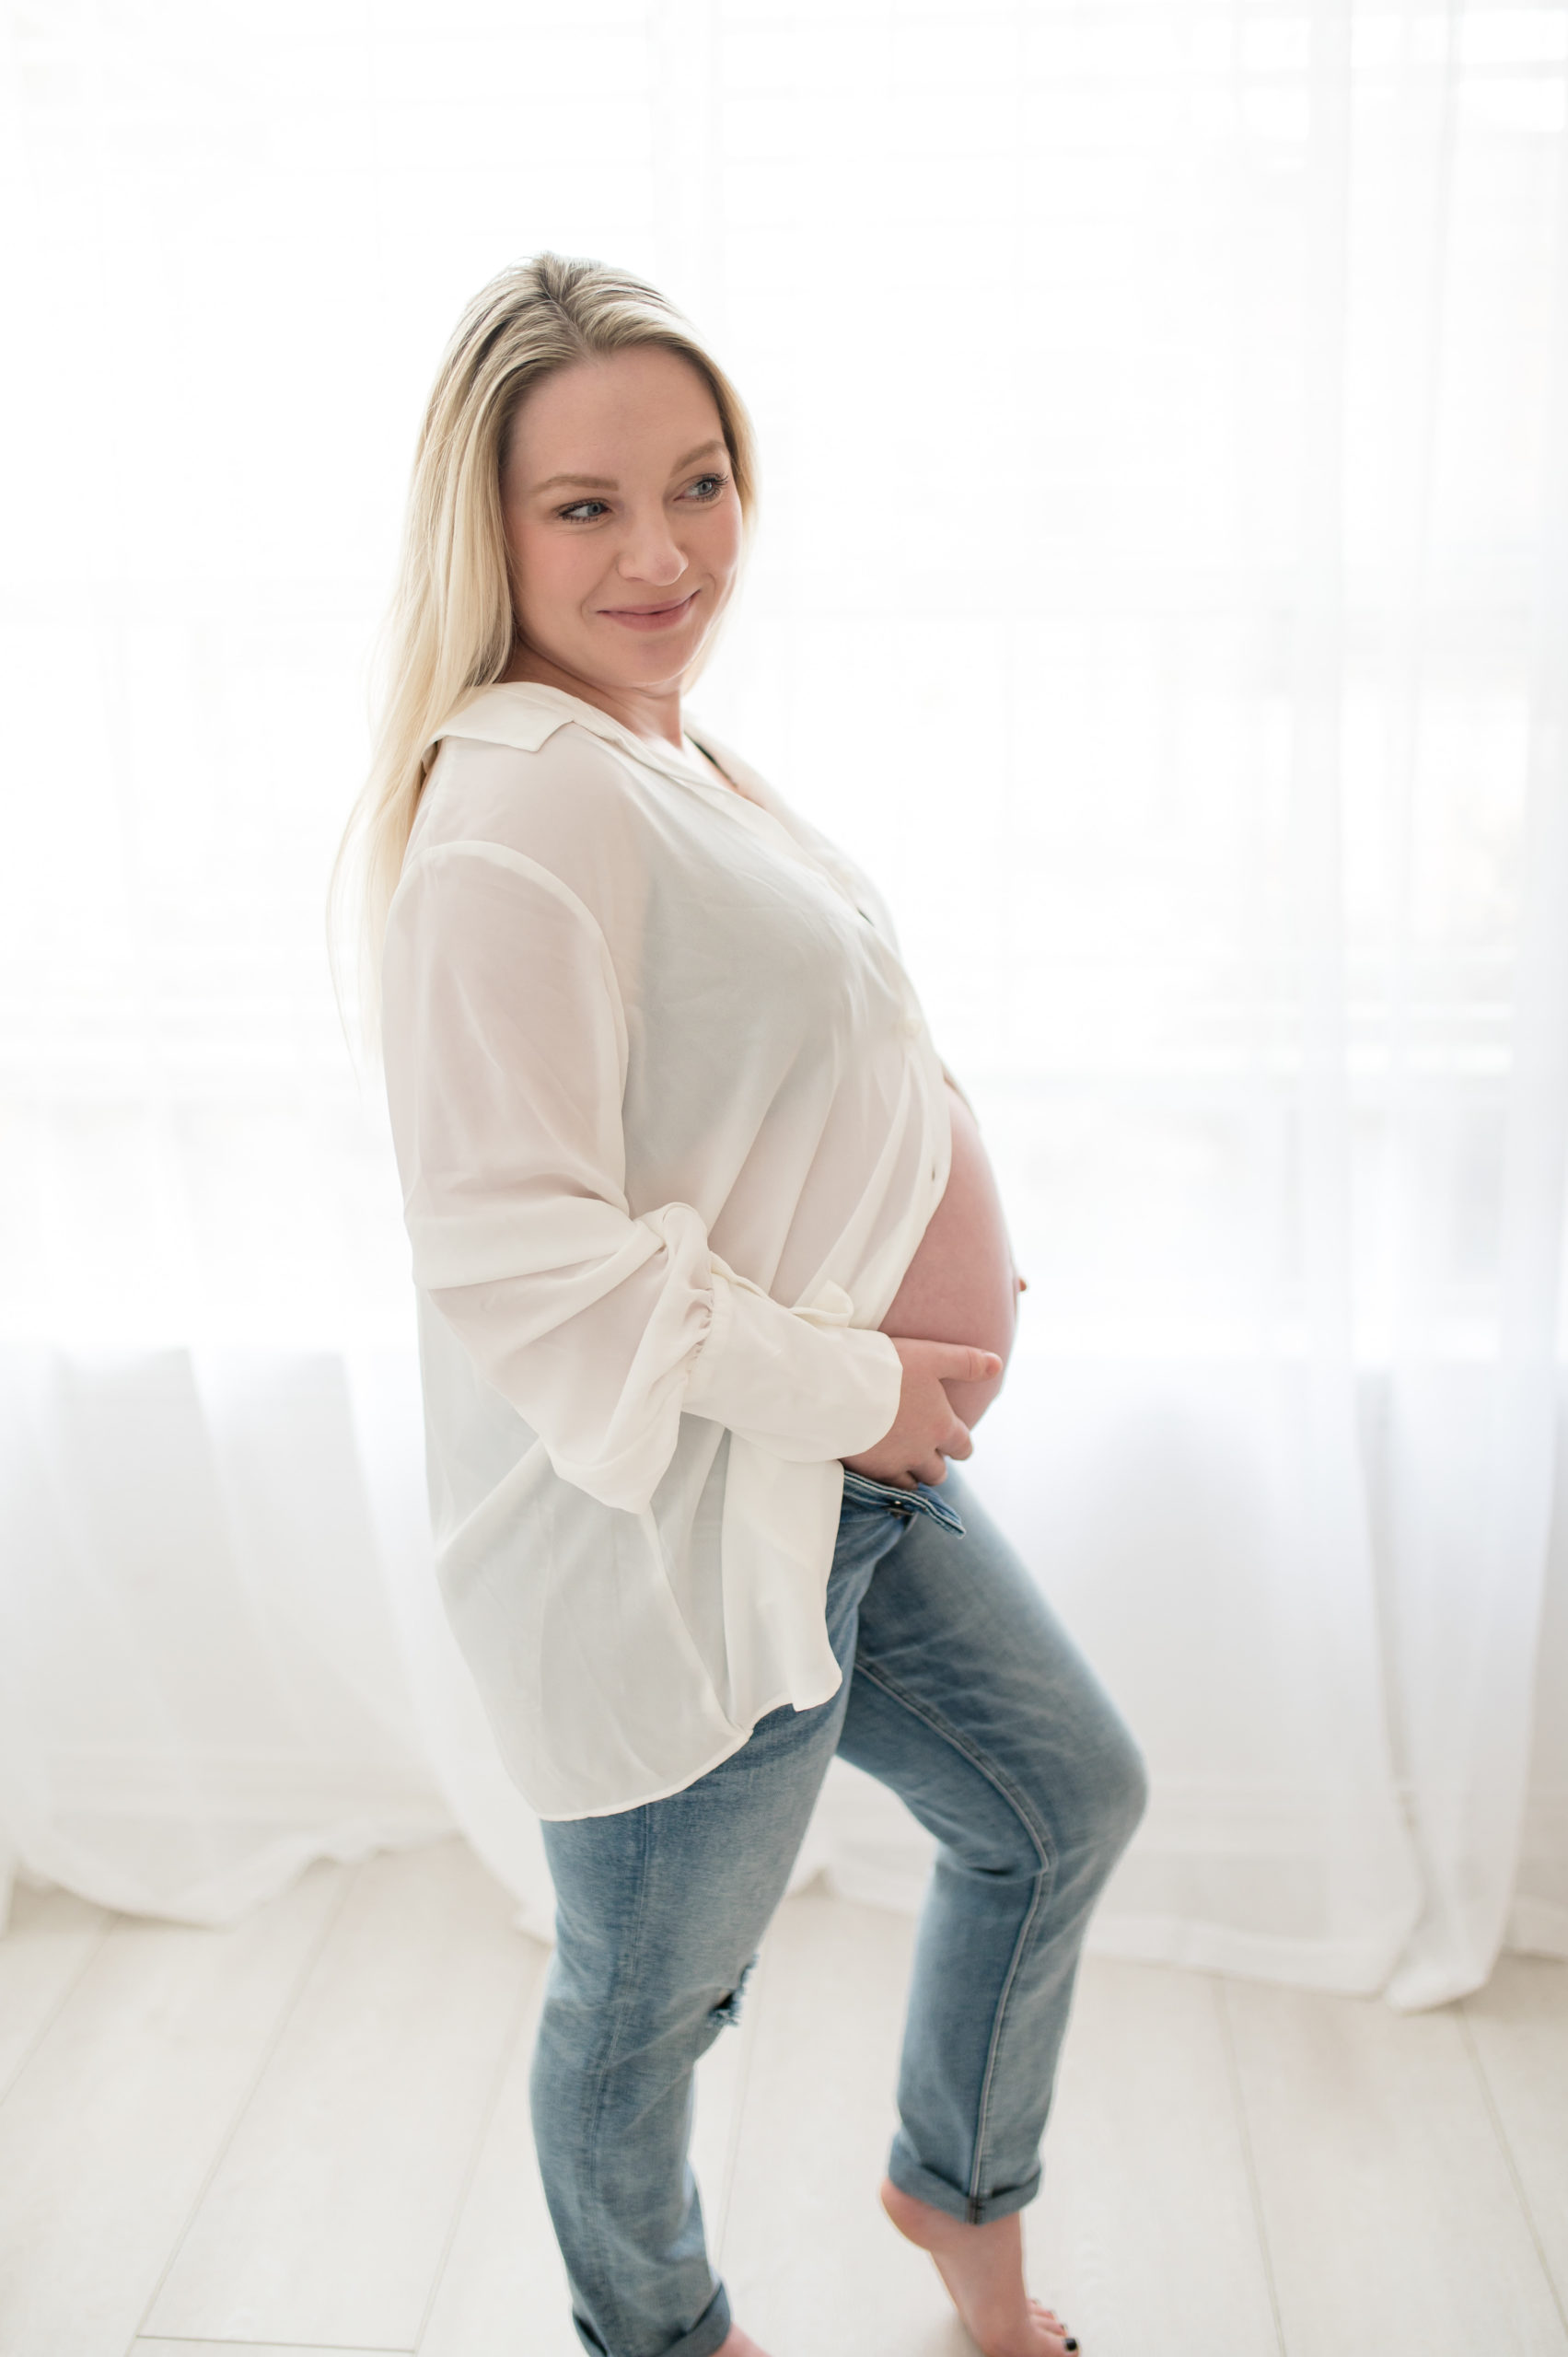 Mother in a casual outfit during maternity session in studio in Dallas Texas photographed by Dallas newborn photographer, Lindsey Dutton Photography